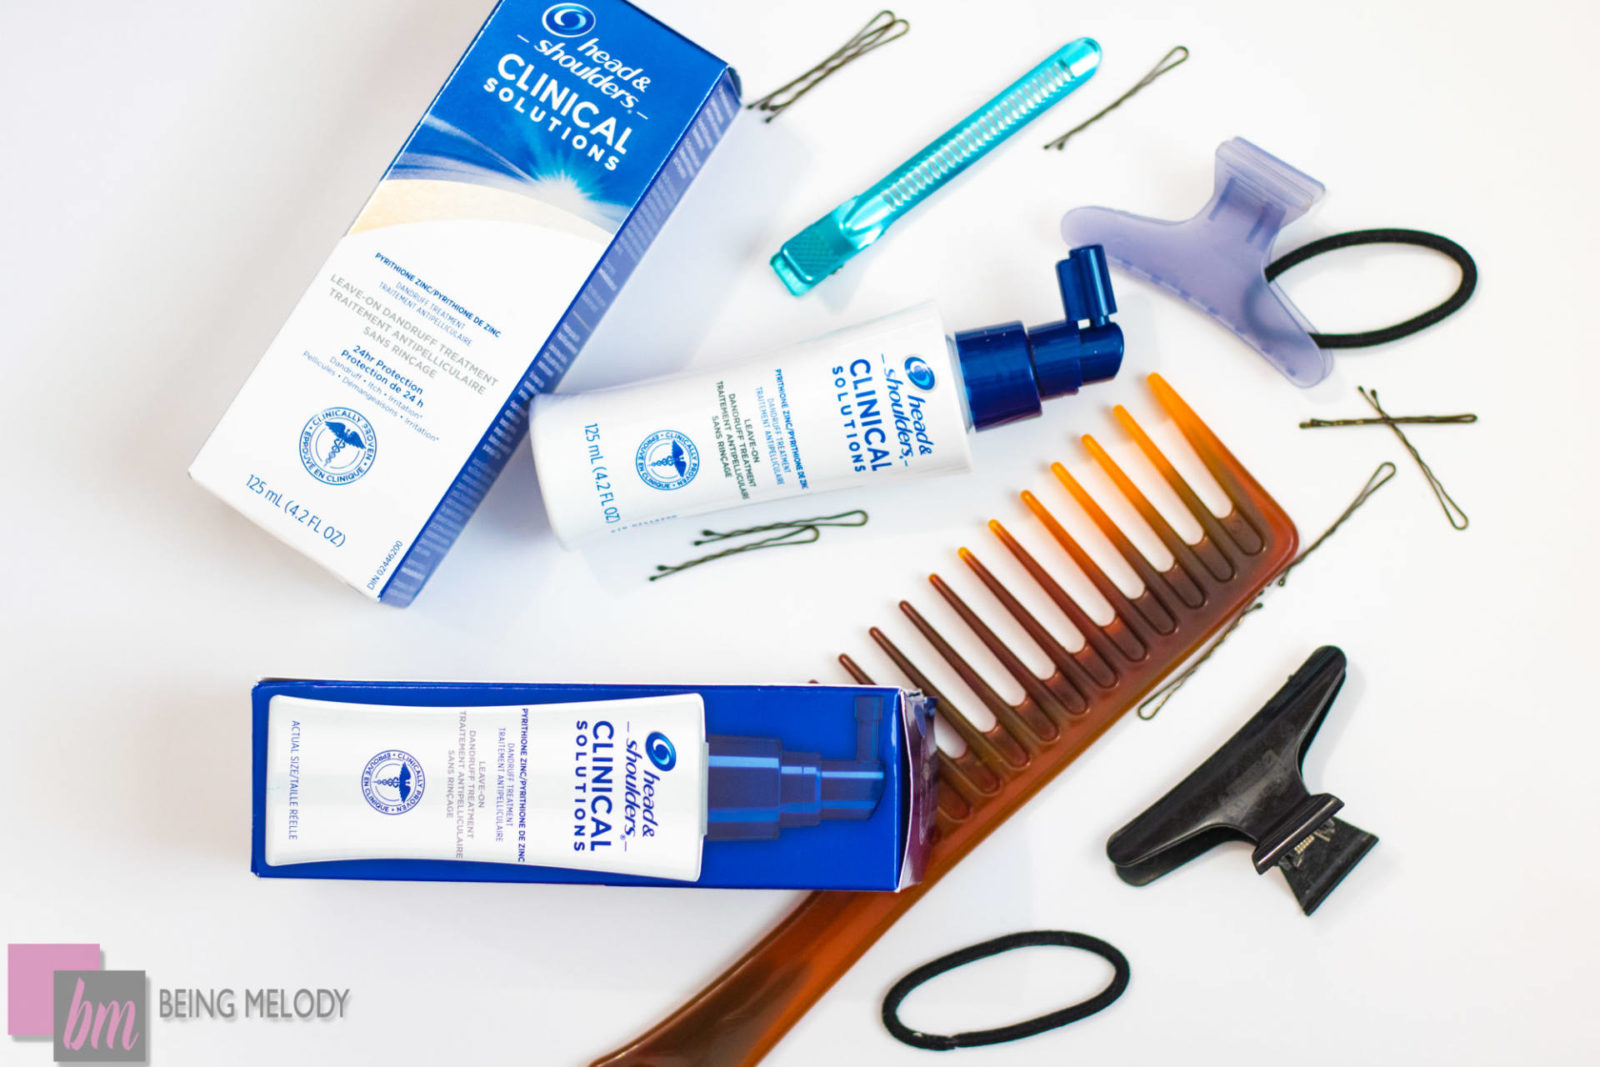 Head and Shoulders Clinical Solutions Leave on Treatment for Natural hair